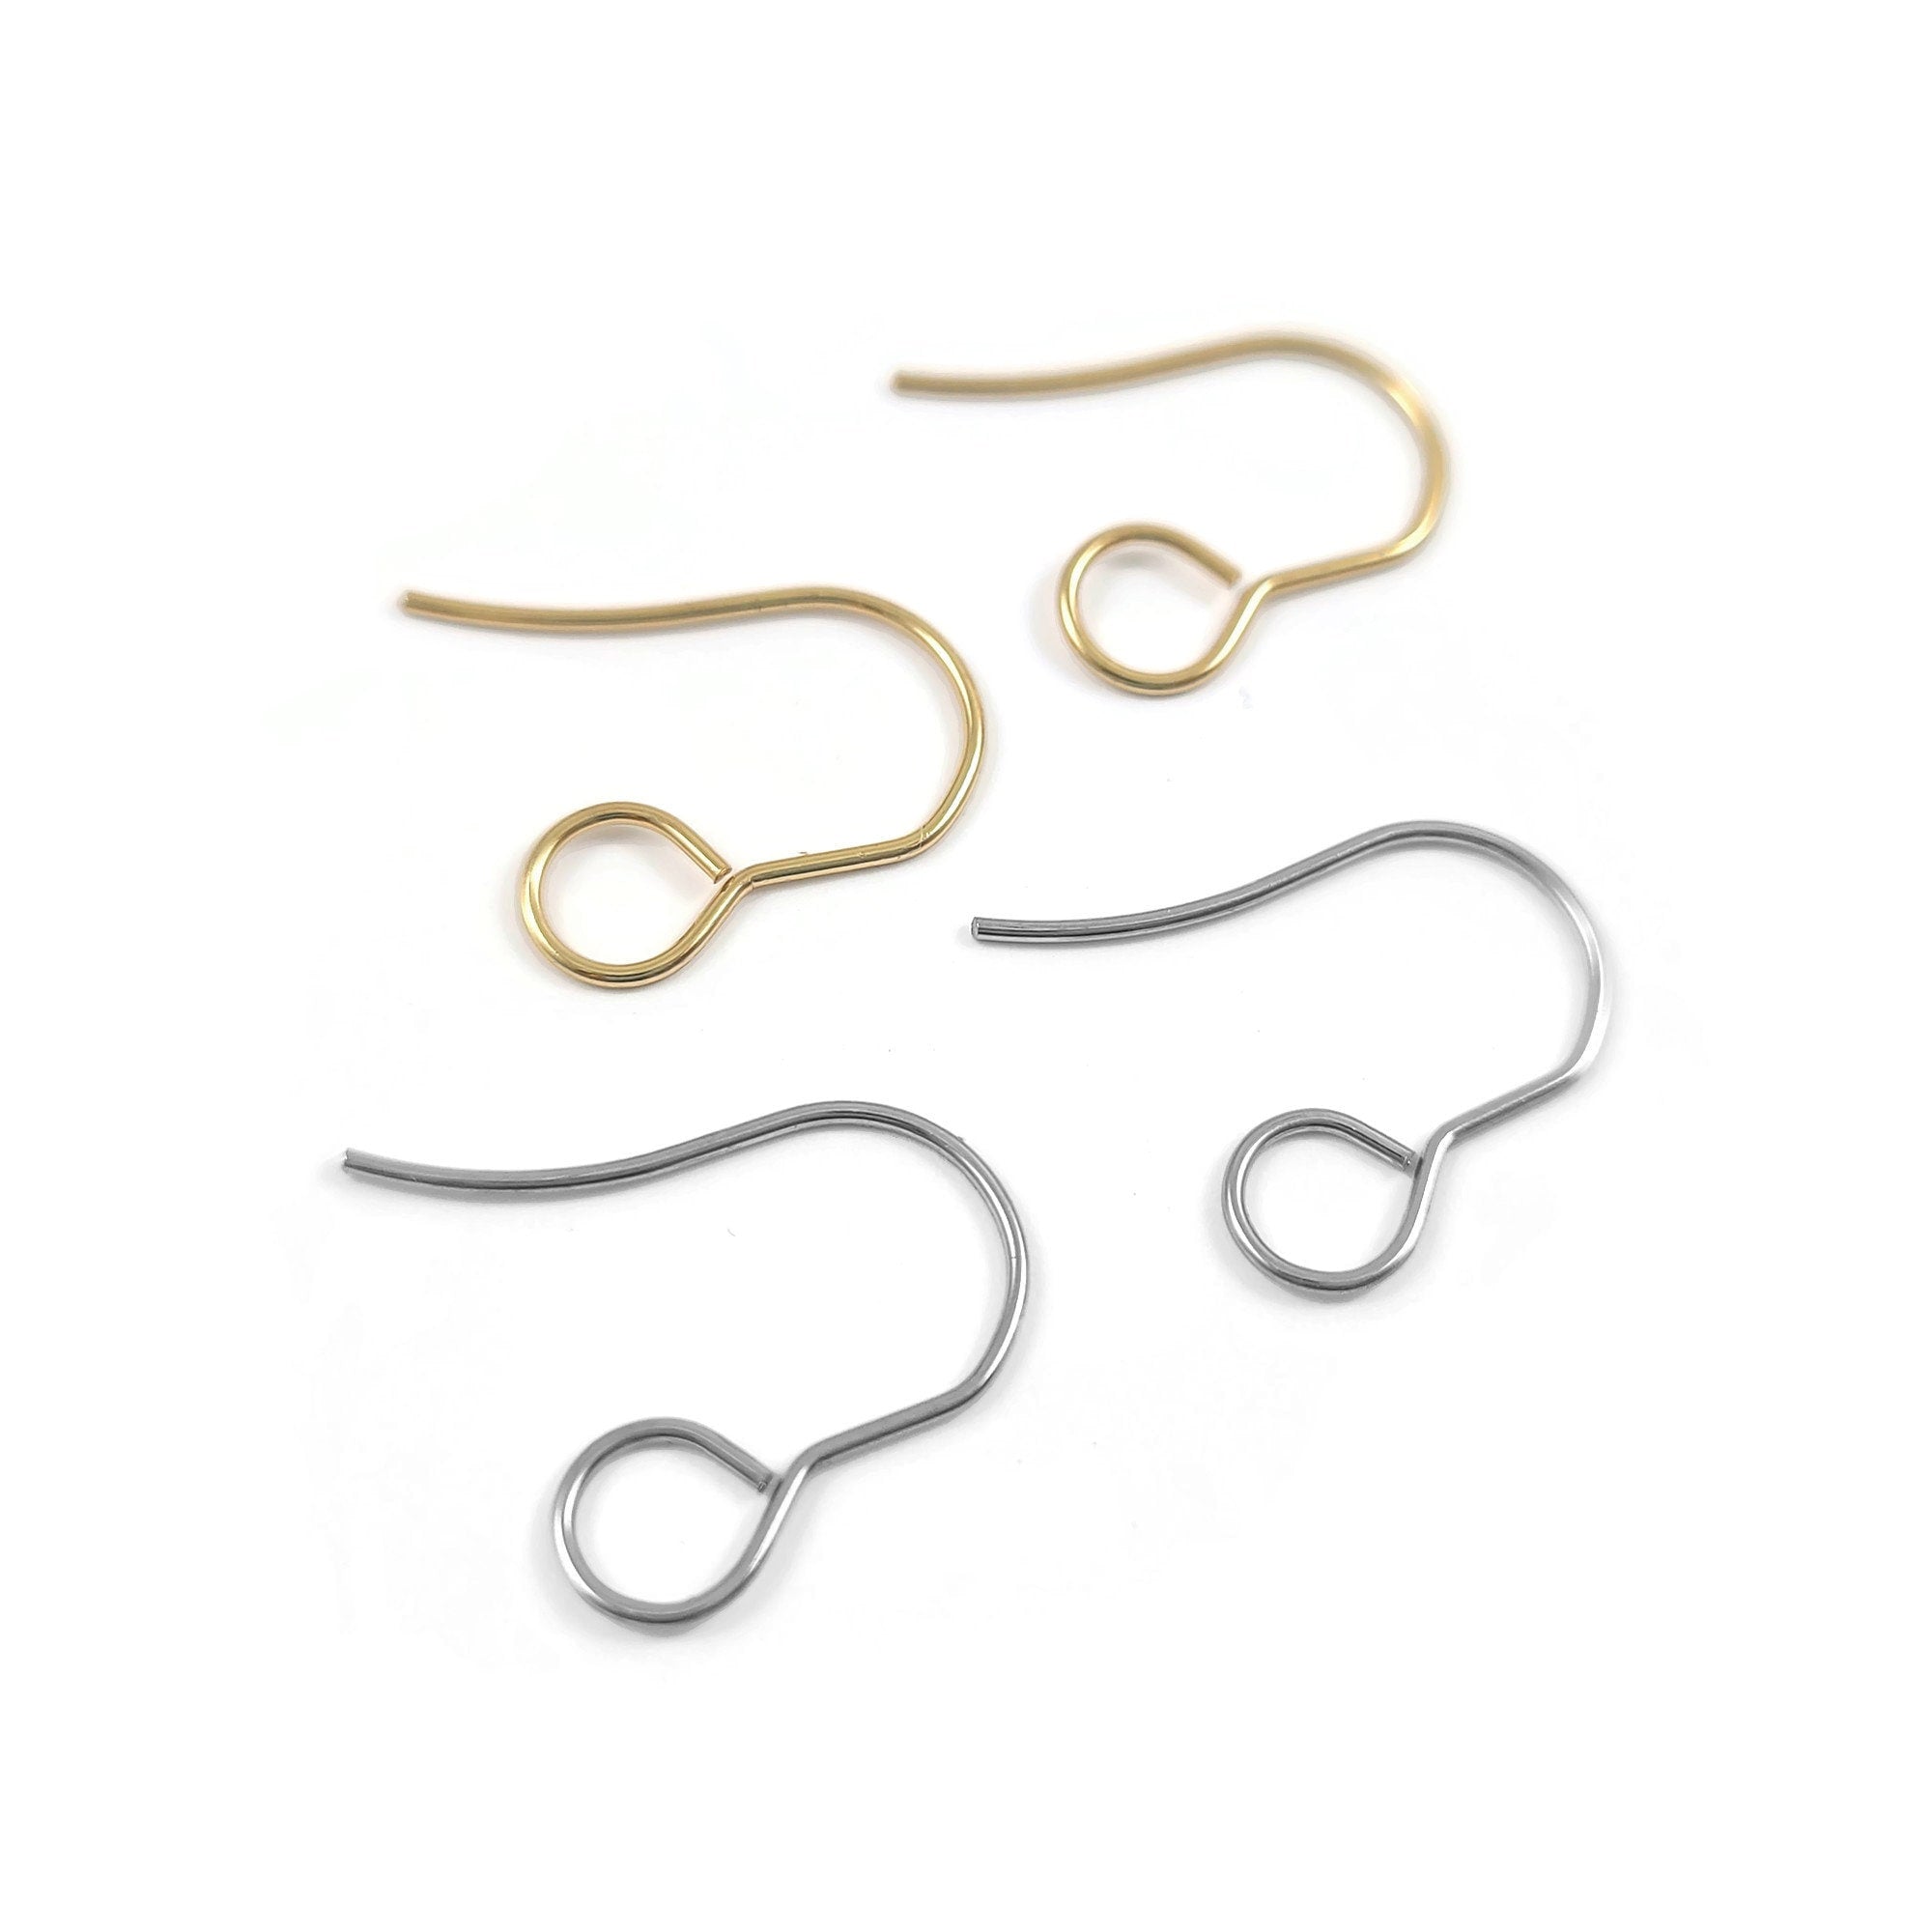 20pcs 316L Surgical Stainless Steel Rose Gold Silver French